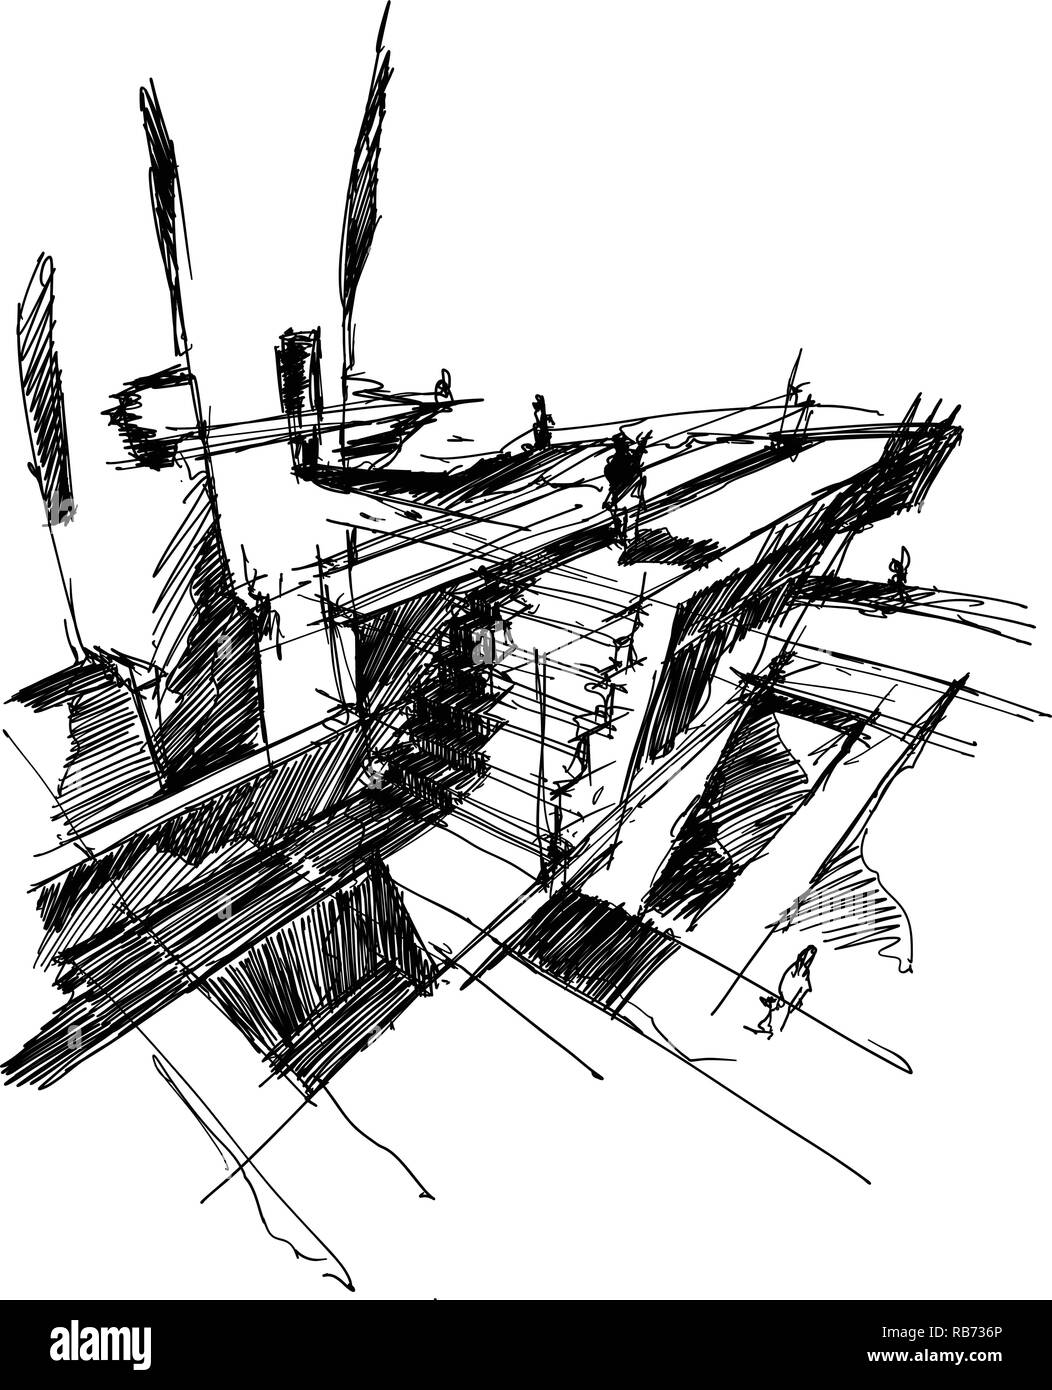 Structural Drawing Studies on Behance